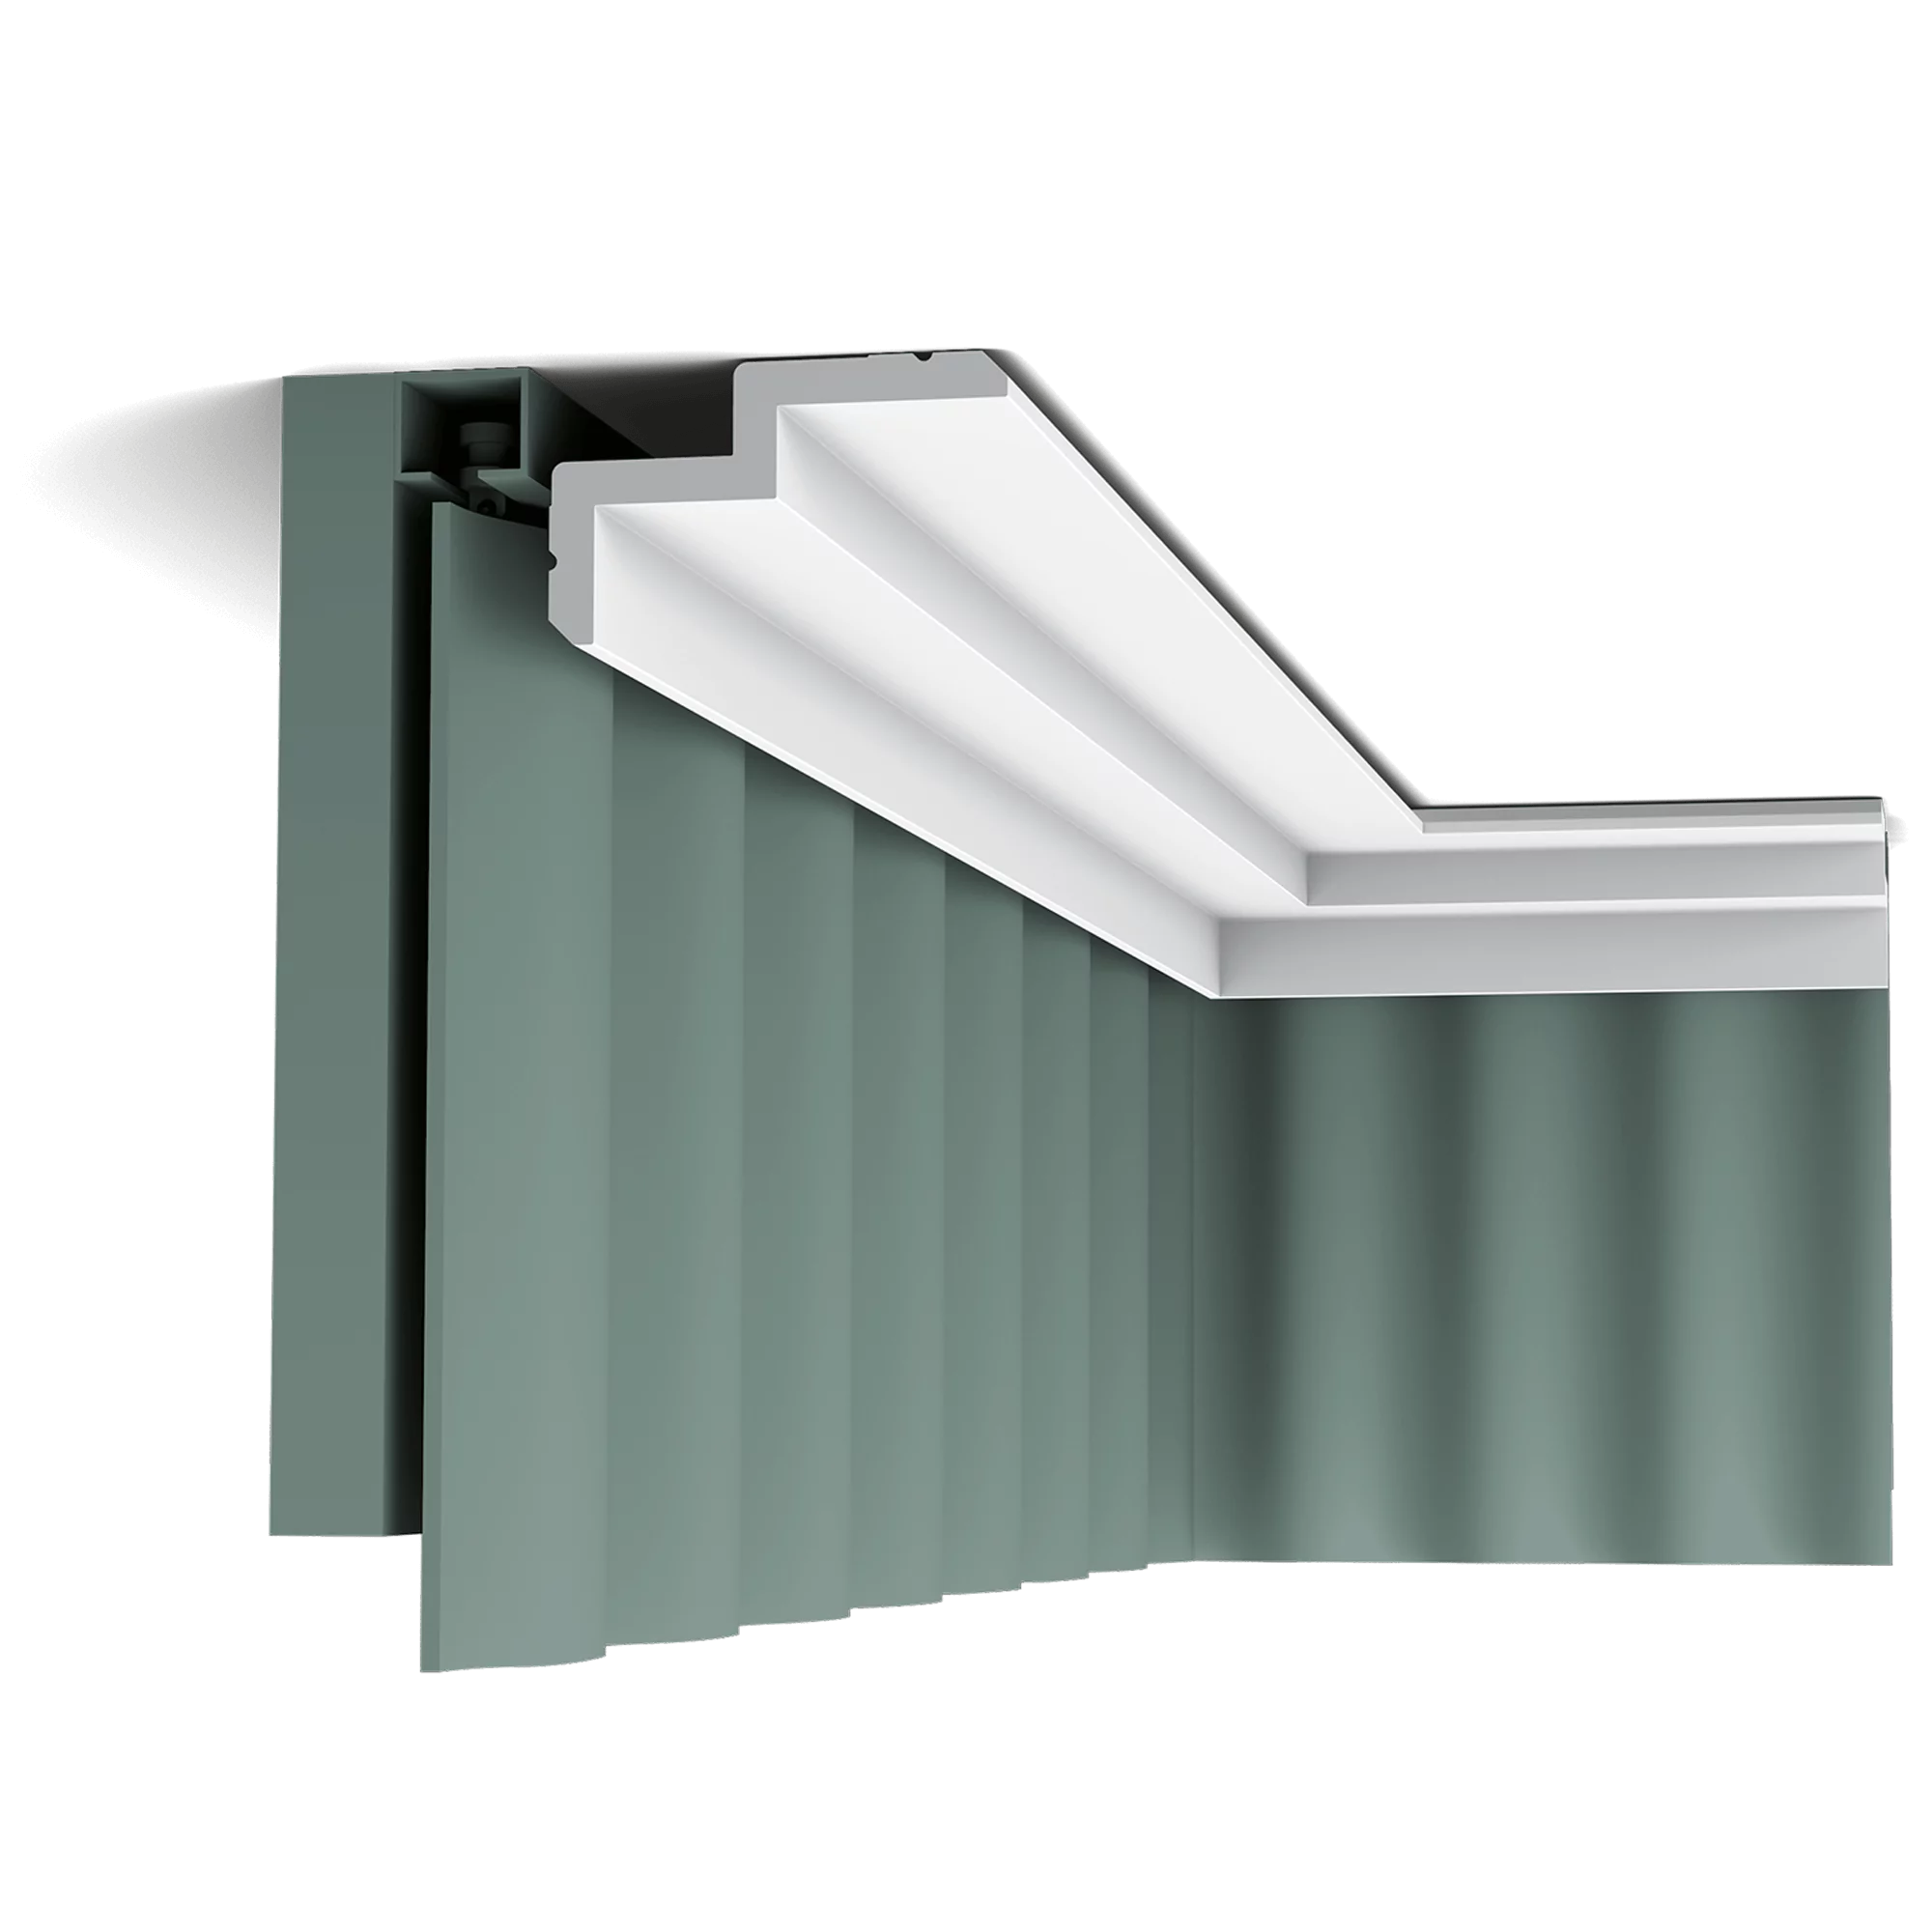 c390 curtain profile 784e This clean, modern profile from the Steps range is also suitable as a curtain pelmet. This nicely conceals the curtain fixtures for a neat finish. Designed by Orio Tonini.